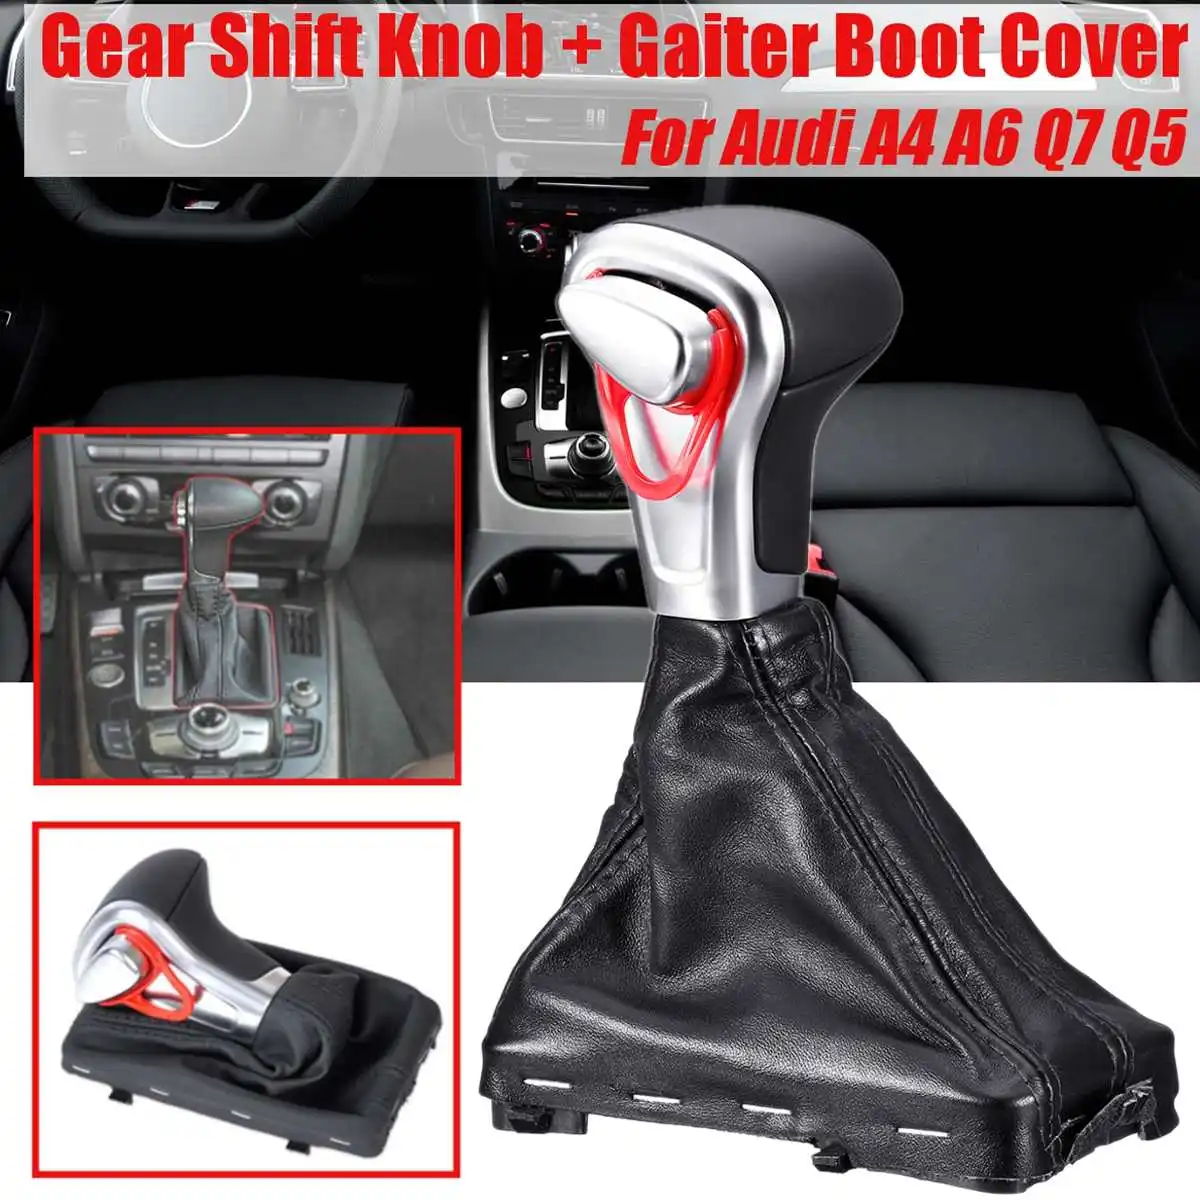 Gaiter Boot Cover For Audi A3 A4 A6 8KD713139B Leather AT Gear Shift Knob